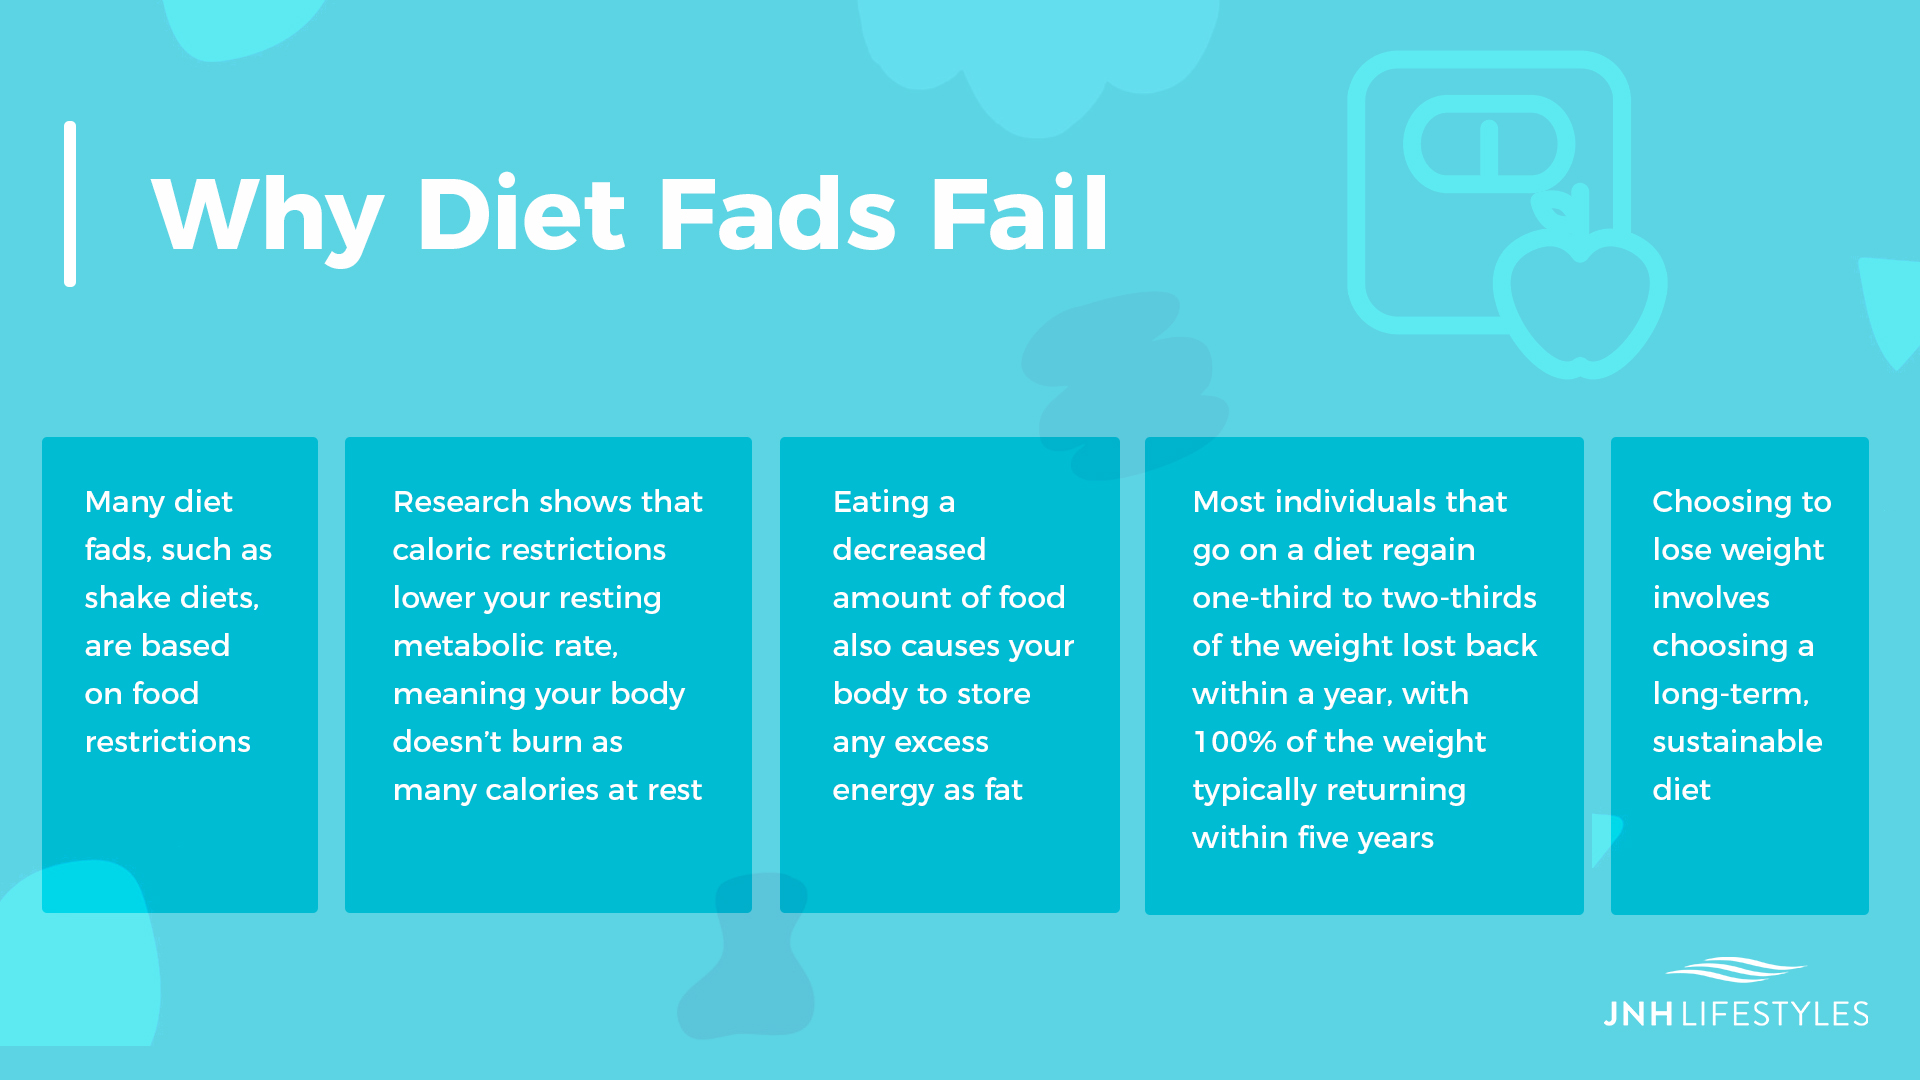 Why Diet Fads Fail -Many of diet fads, such as shake diets, are based on food restrictions -Research shows that caloric restrictions lower your resting metabolic rate, meaning your body doesn’t burn as many calories at rest -Eating a decreased amount of food also causes your body to store any excess energy as fat -Most individuals that go on a diet regain one-third to two-thirds of the weight lost back within a year, with 100% of the weight typically returning within five years -Choosing to lose weight involves choosing a long-term, sustainable diet